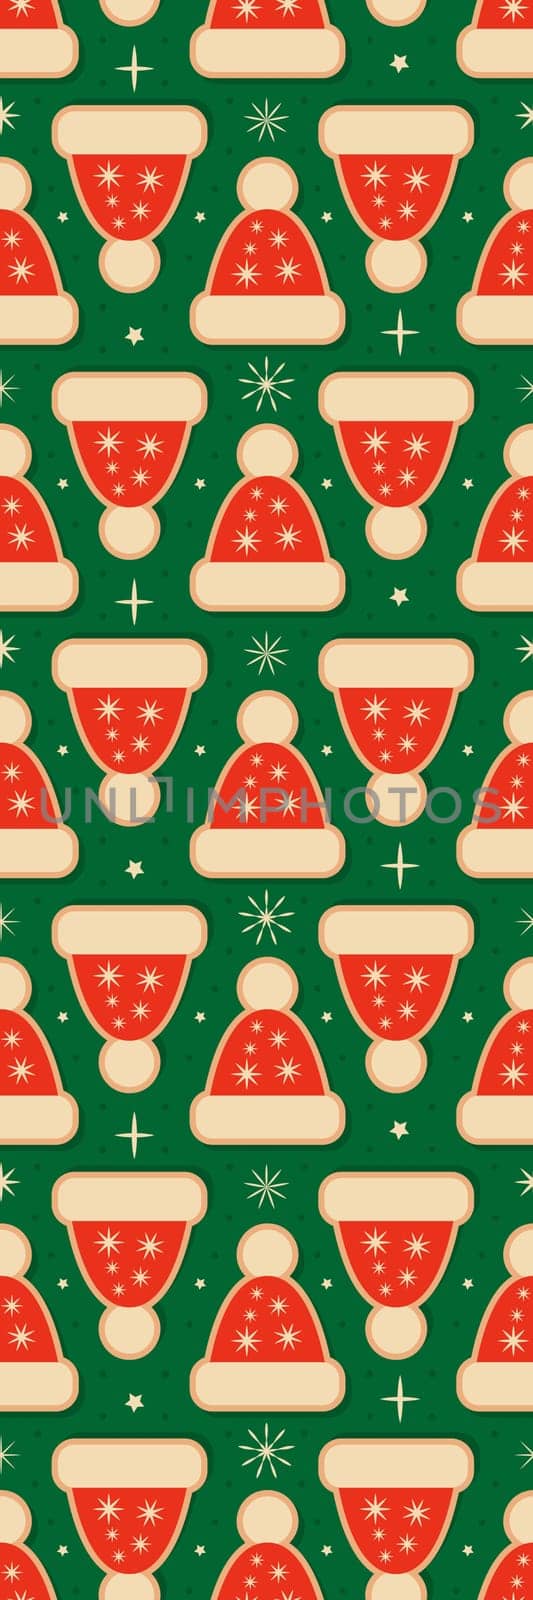 Green Red Christmas hats bookmark printable by Dustick